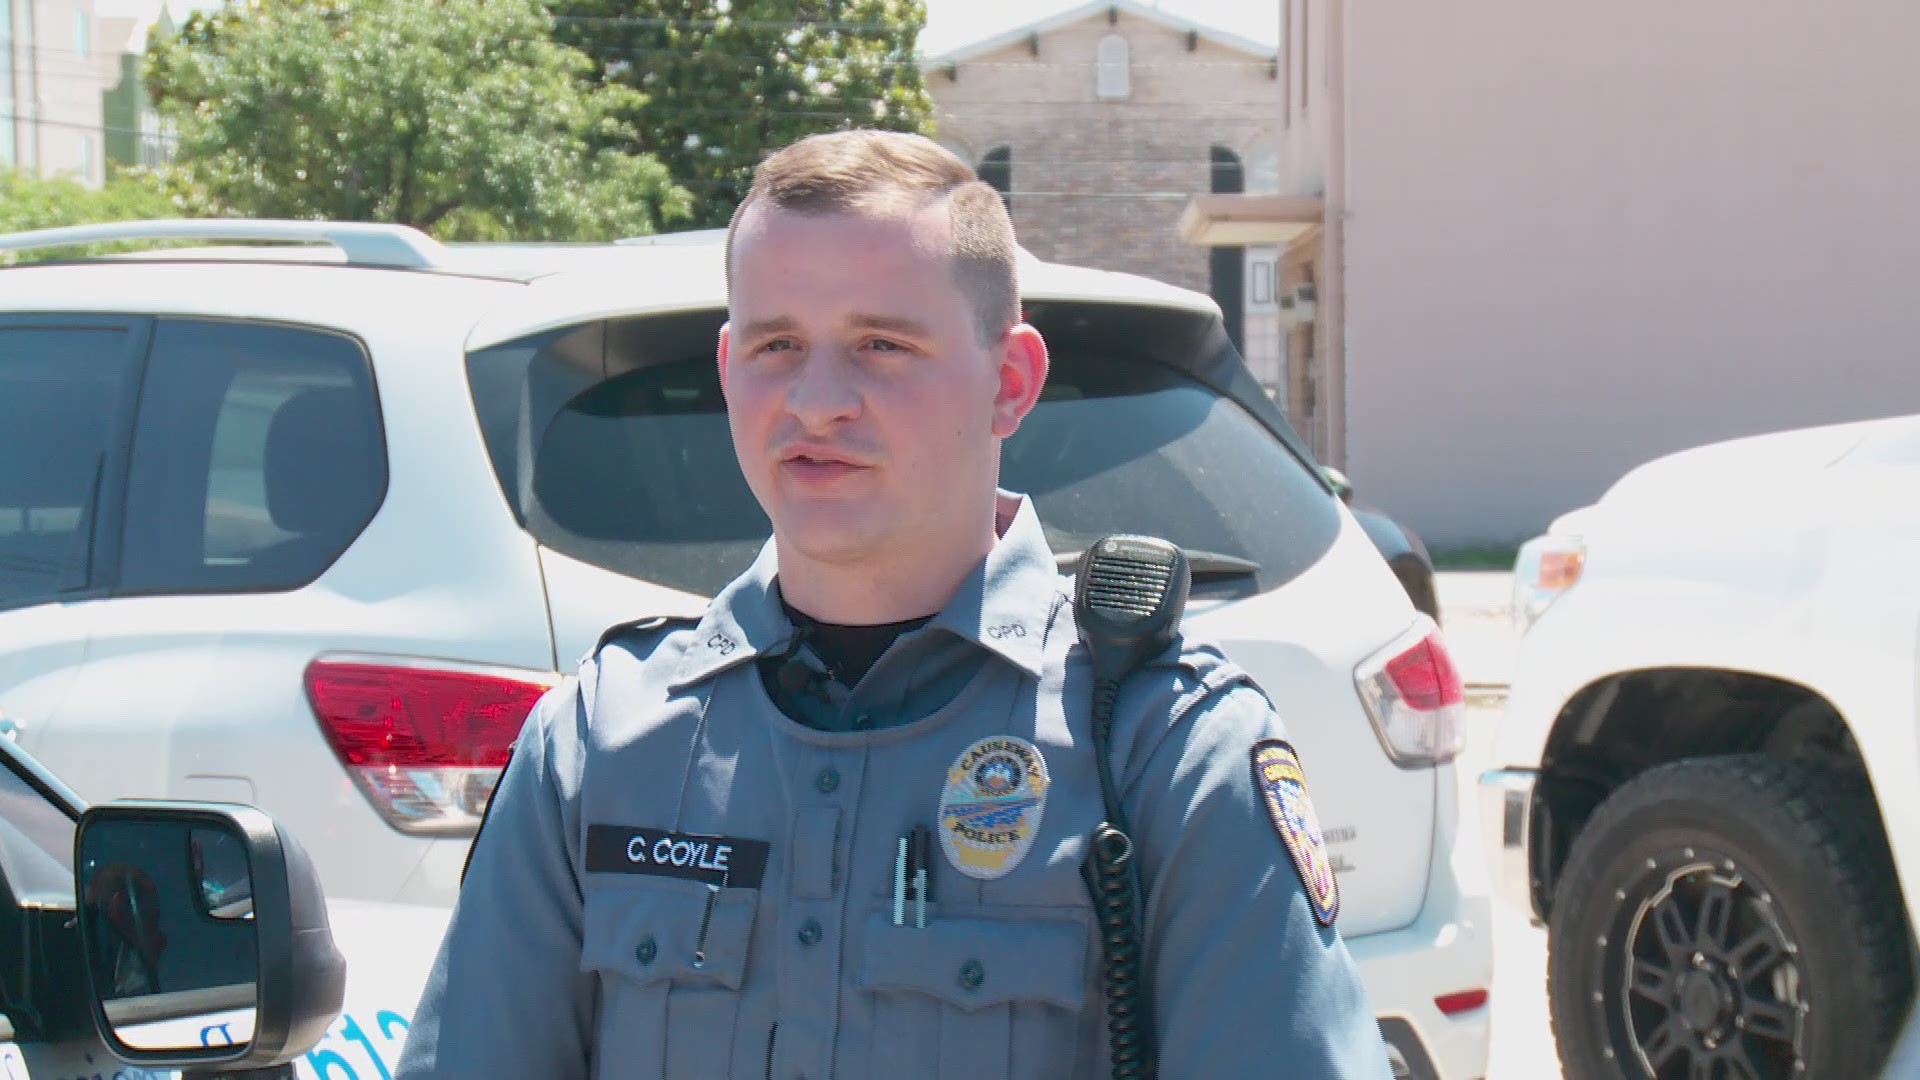 Christian Coyle of the Causeway Police talks about rescuing the occupants of a pickup truck that went over the Causeway bridge guard rail and into Lake Pontchartrain Tuesday morning.